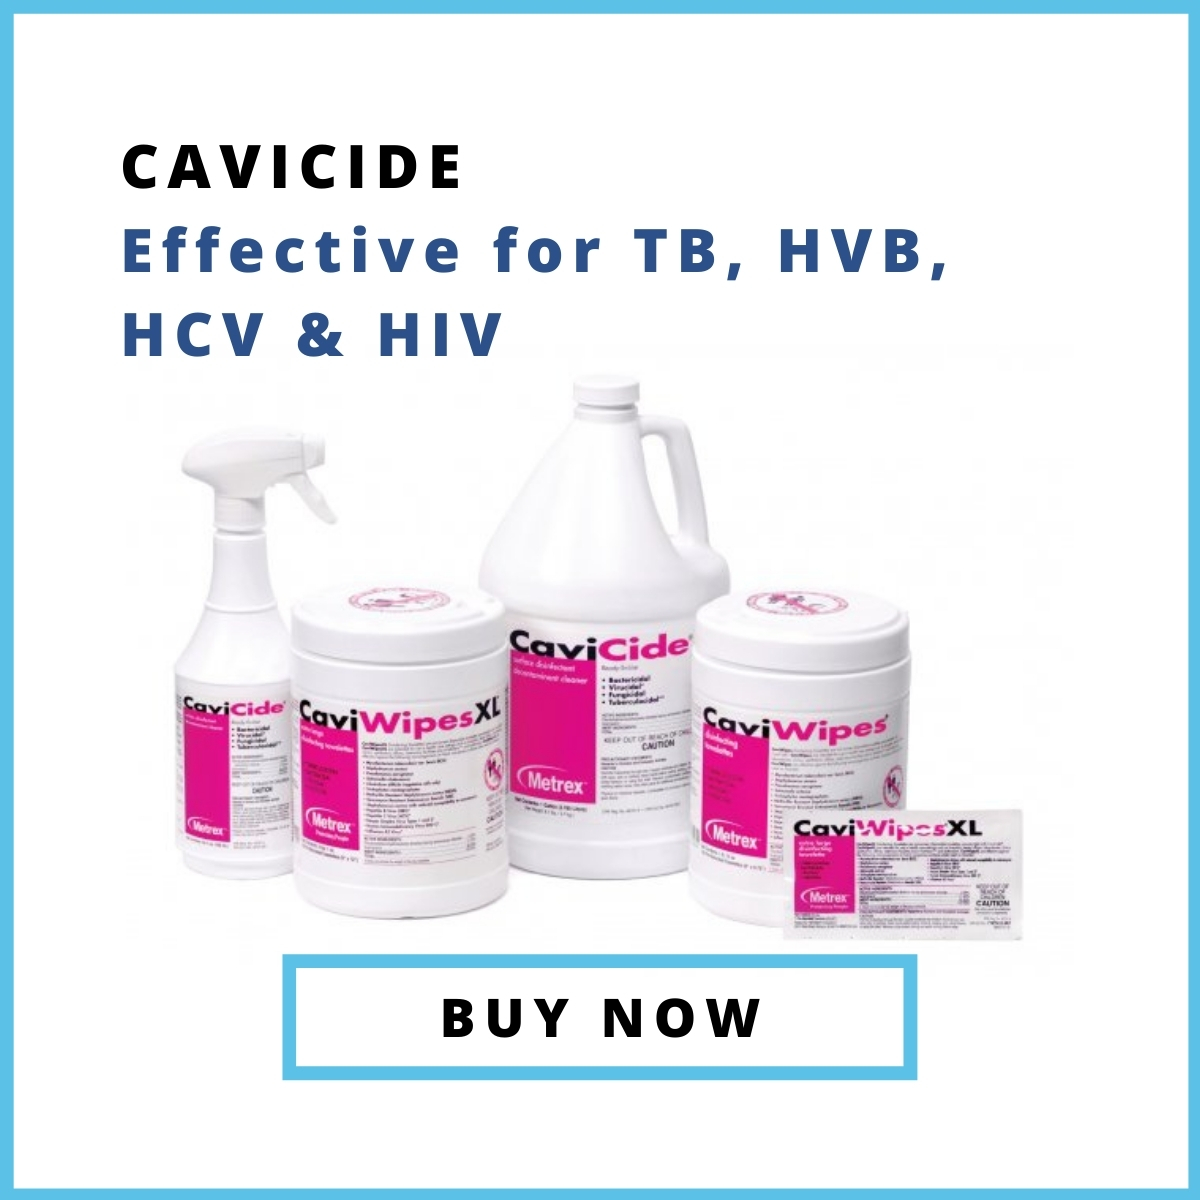 Shoppable Ad - Cavicide Disinfectant – Metrex - Buy Now